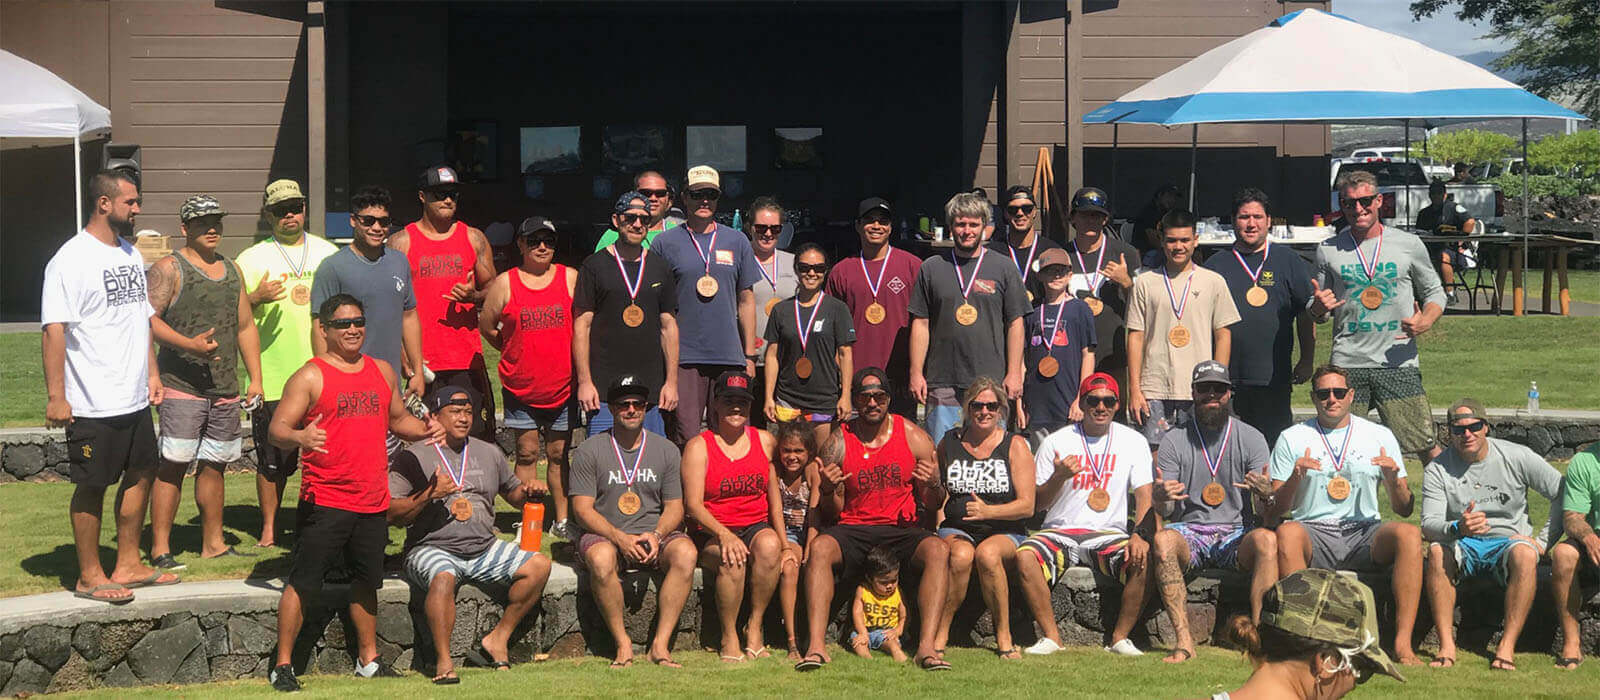 Participants in the Roi Round-up Dive Tournament